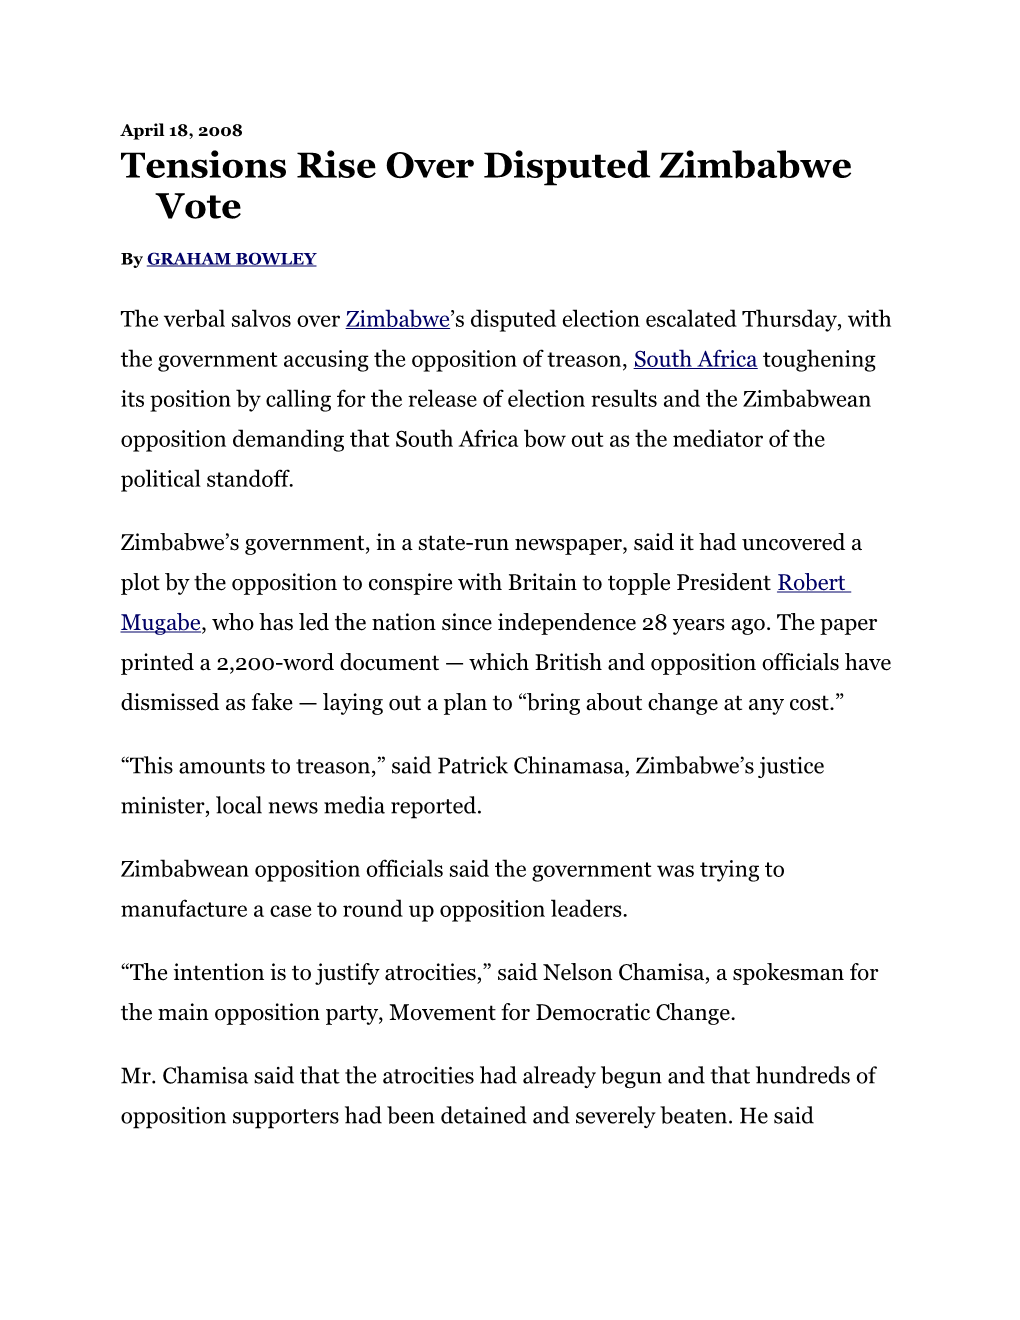 Tensions Rise Over Disputed Zimbabwe Vote